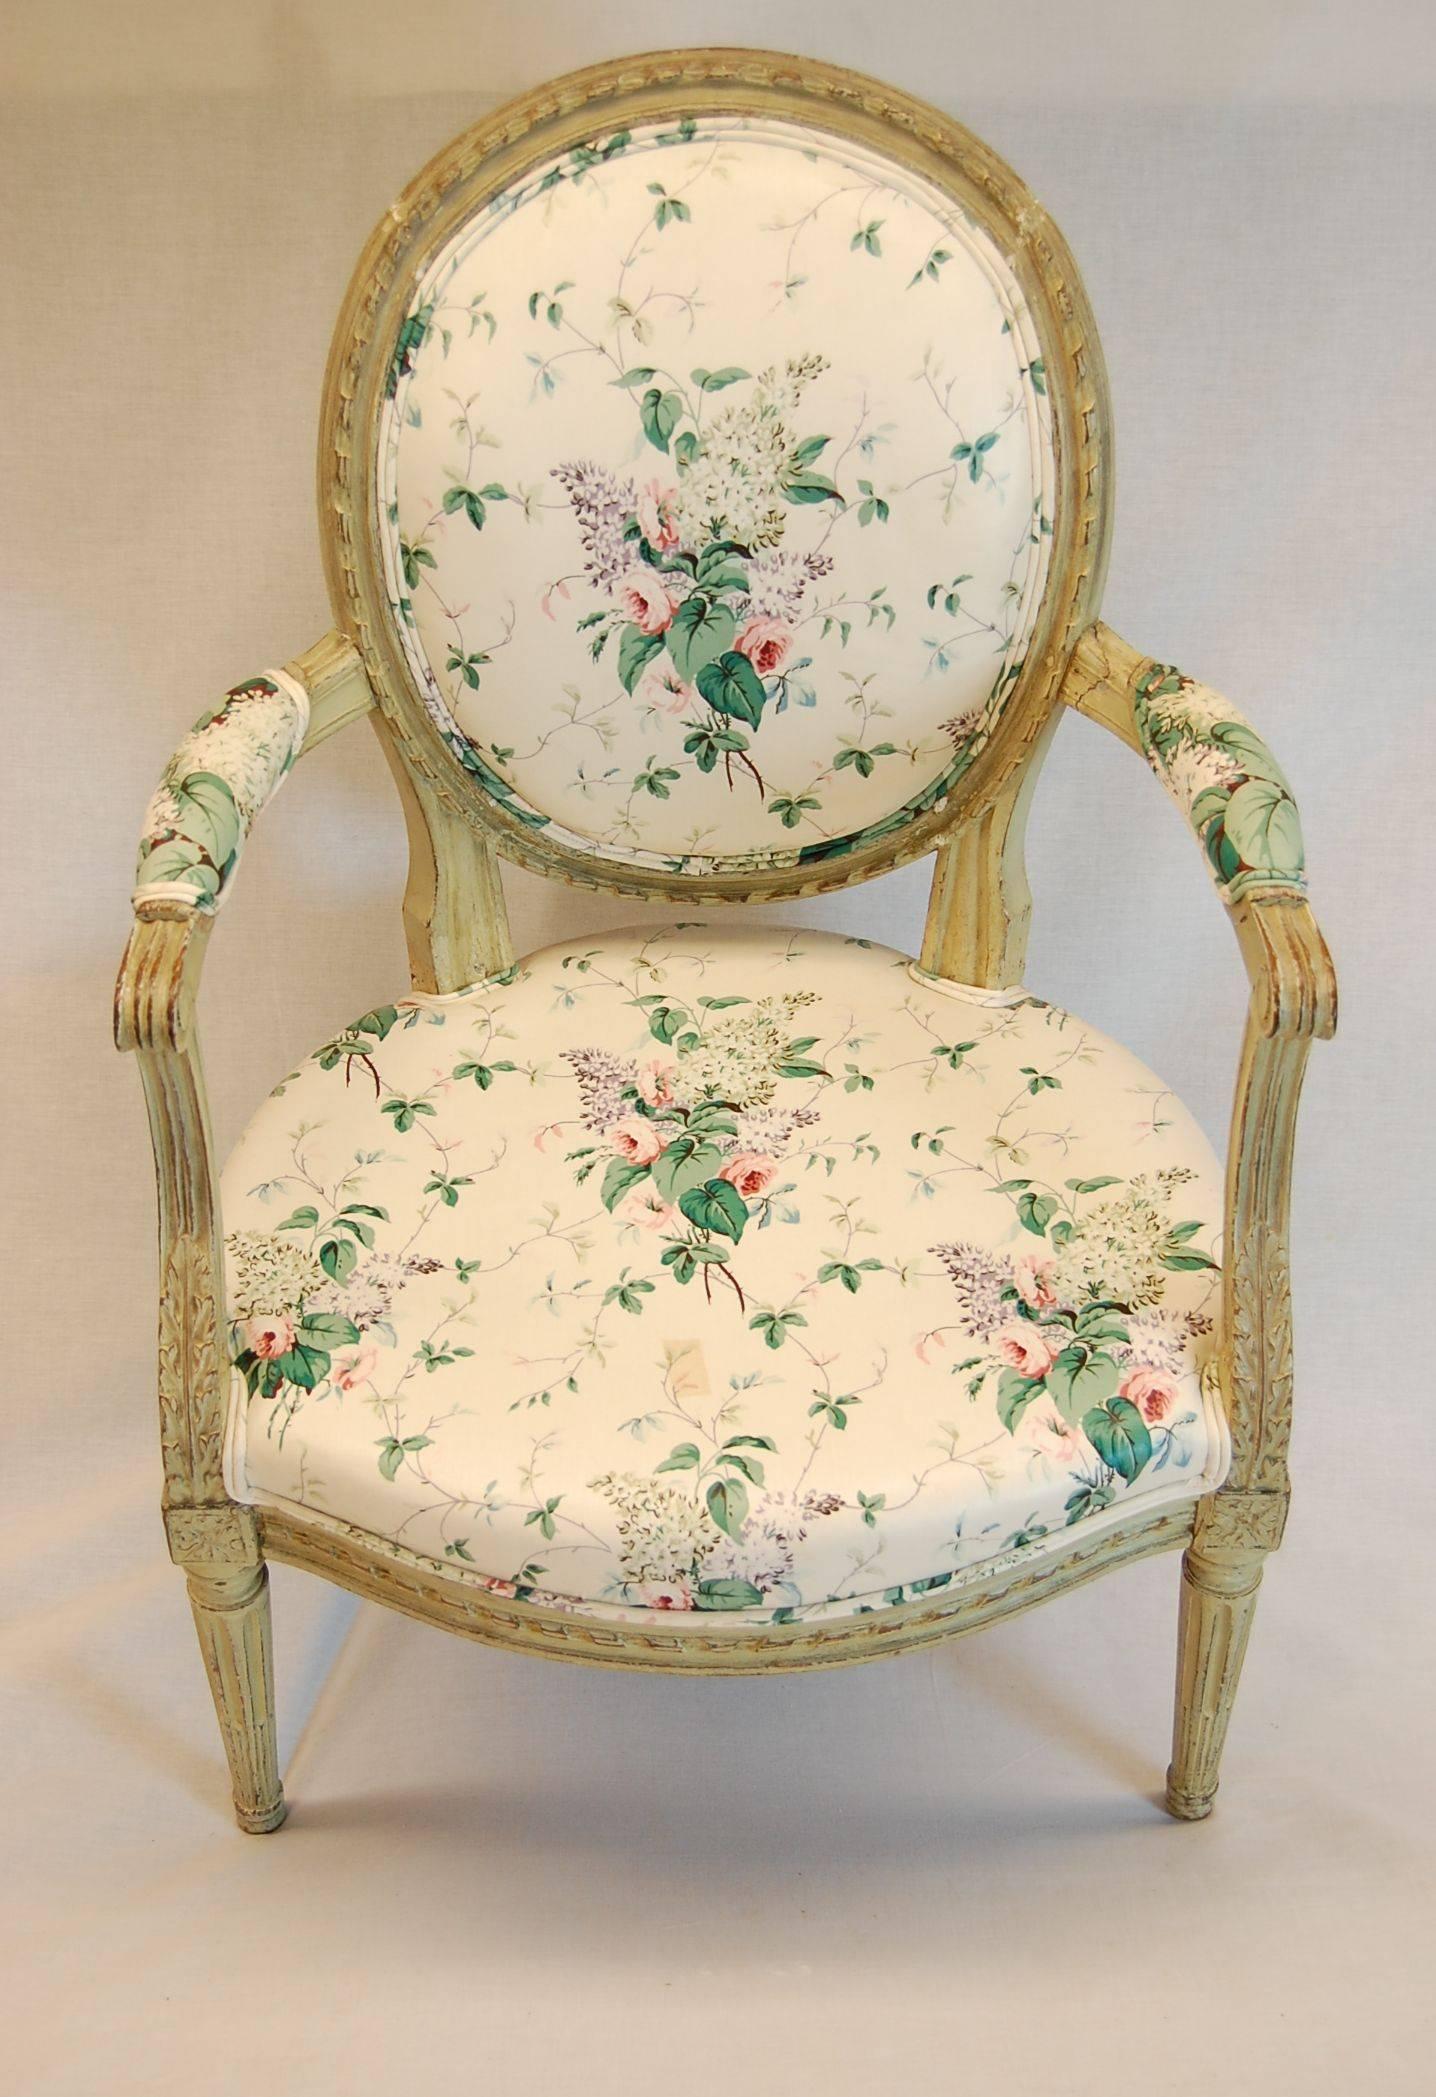 Early 19th Century Louis XVI Carved Wood Fauteuil in Green Painted Finish, circa 1800